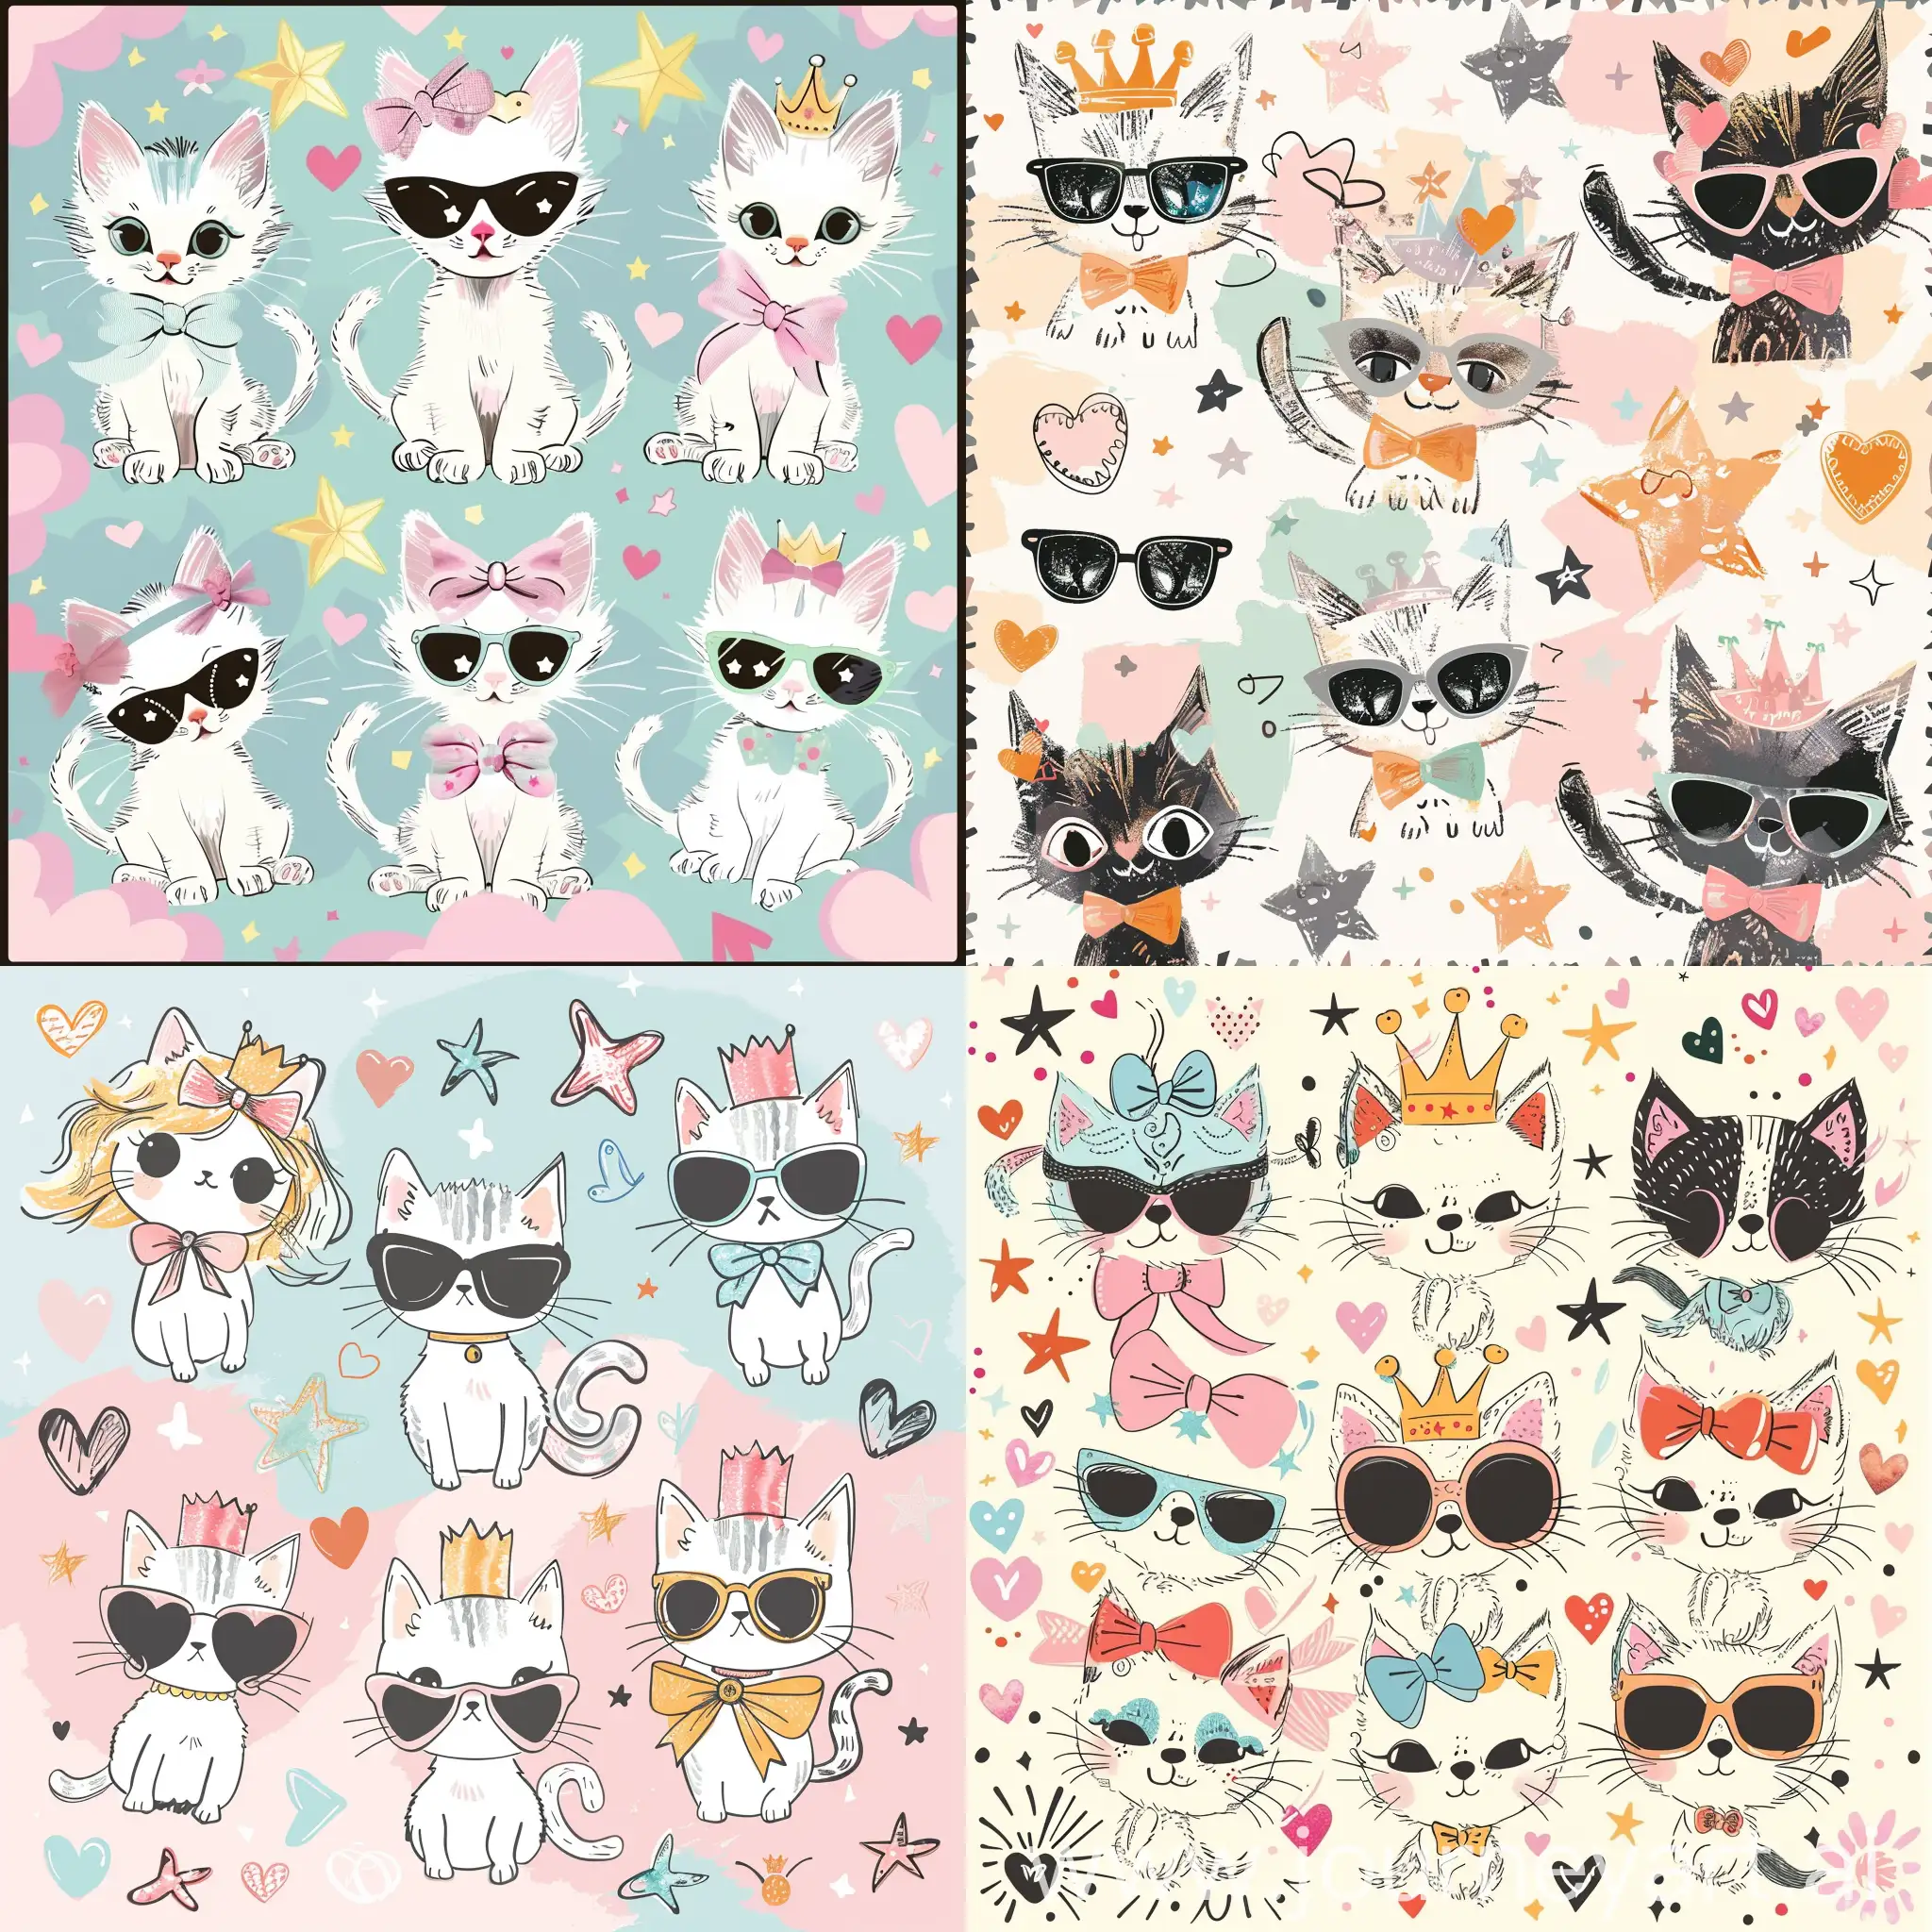 chic pastel background adorned with Coquette-inspired illustrations of adorable kittens wearing bows, crowns, or sunglasses. Surround the kittens with hearts, stars, and other girly motifs.